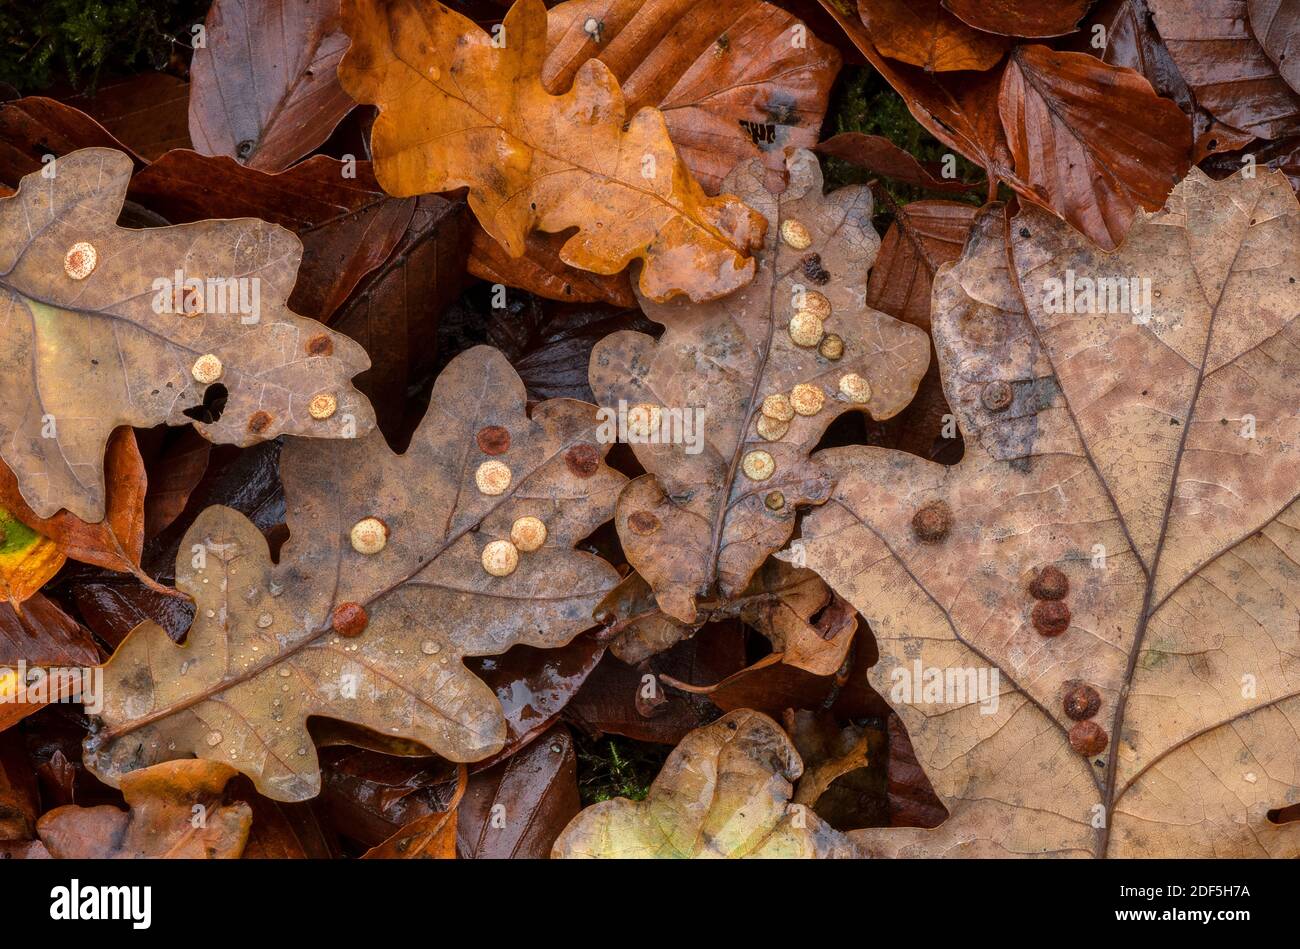 Common spangle galls, Neuroterus quercusbaccarum, on fallen rotting oak leaves in autumn. Stock Photo